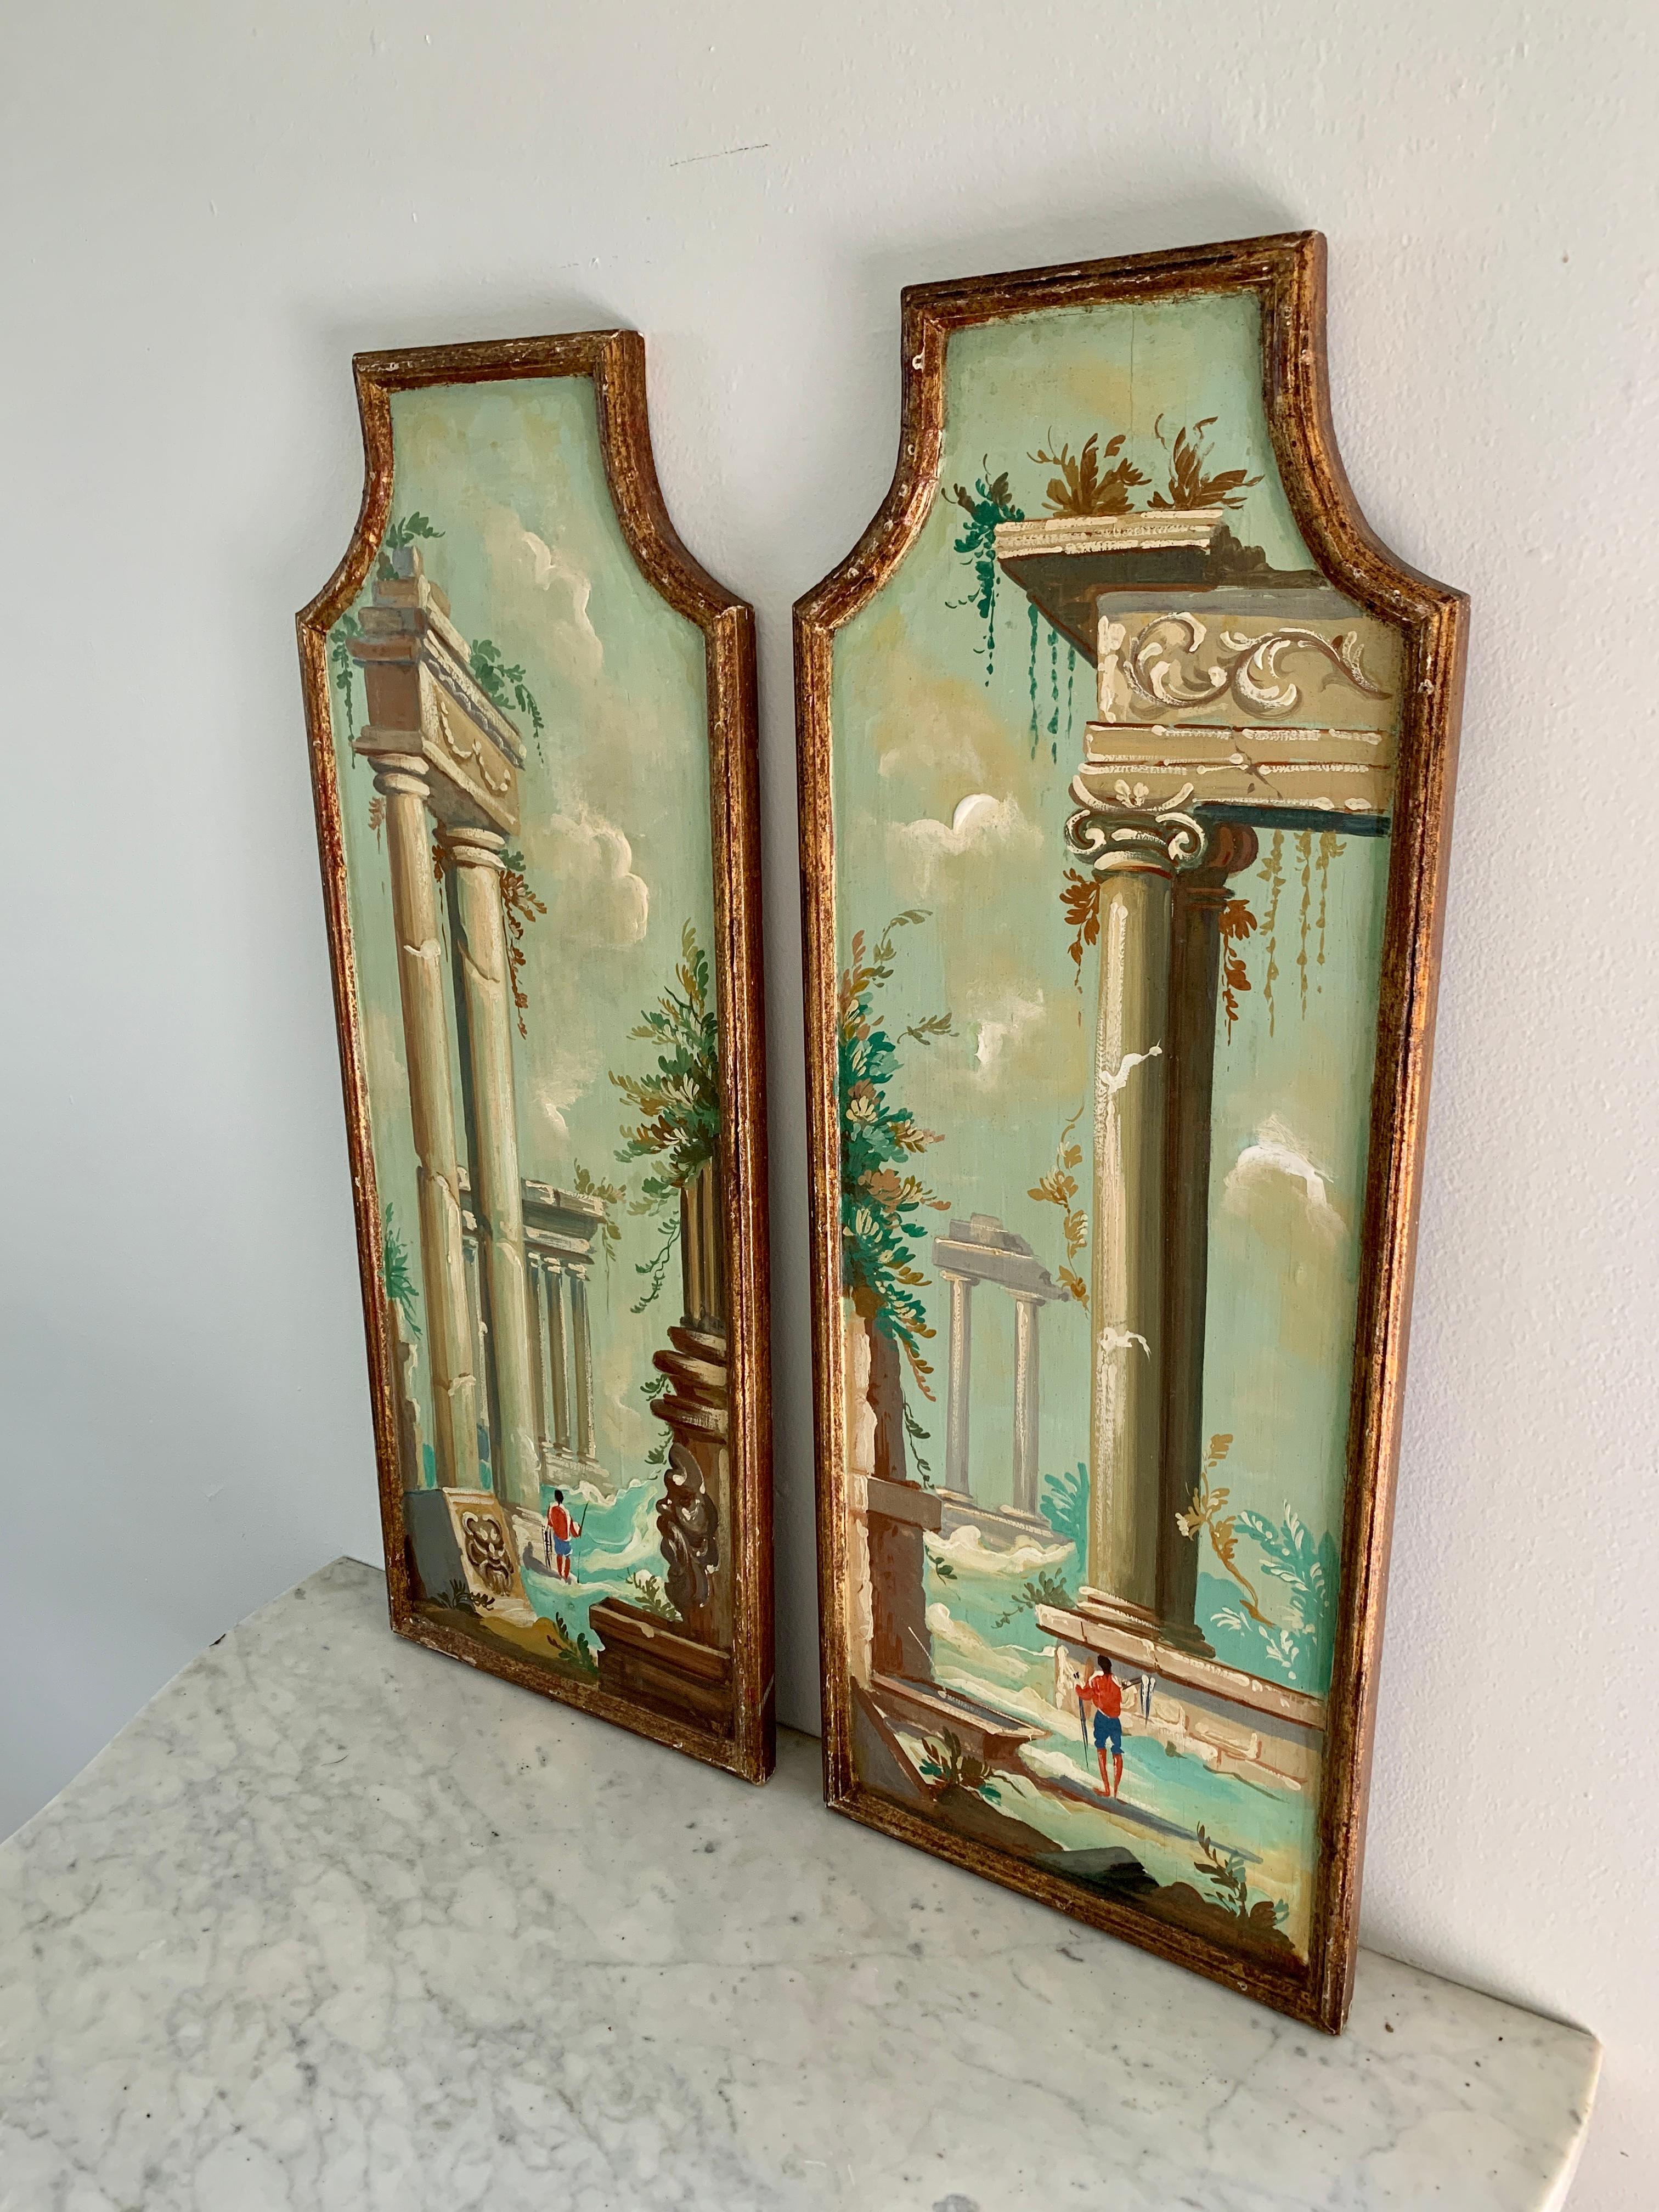 A gorgeous pair of Grand Tour or Neoclassical style framed oil paintings of an Italian Capriccio landscape with ruins

Italy, Early Century

Oil on board, gilt frame

Measures: 10.25